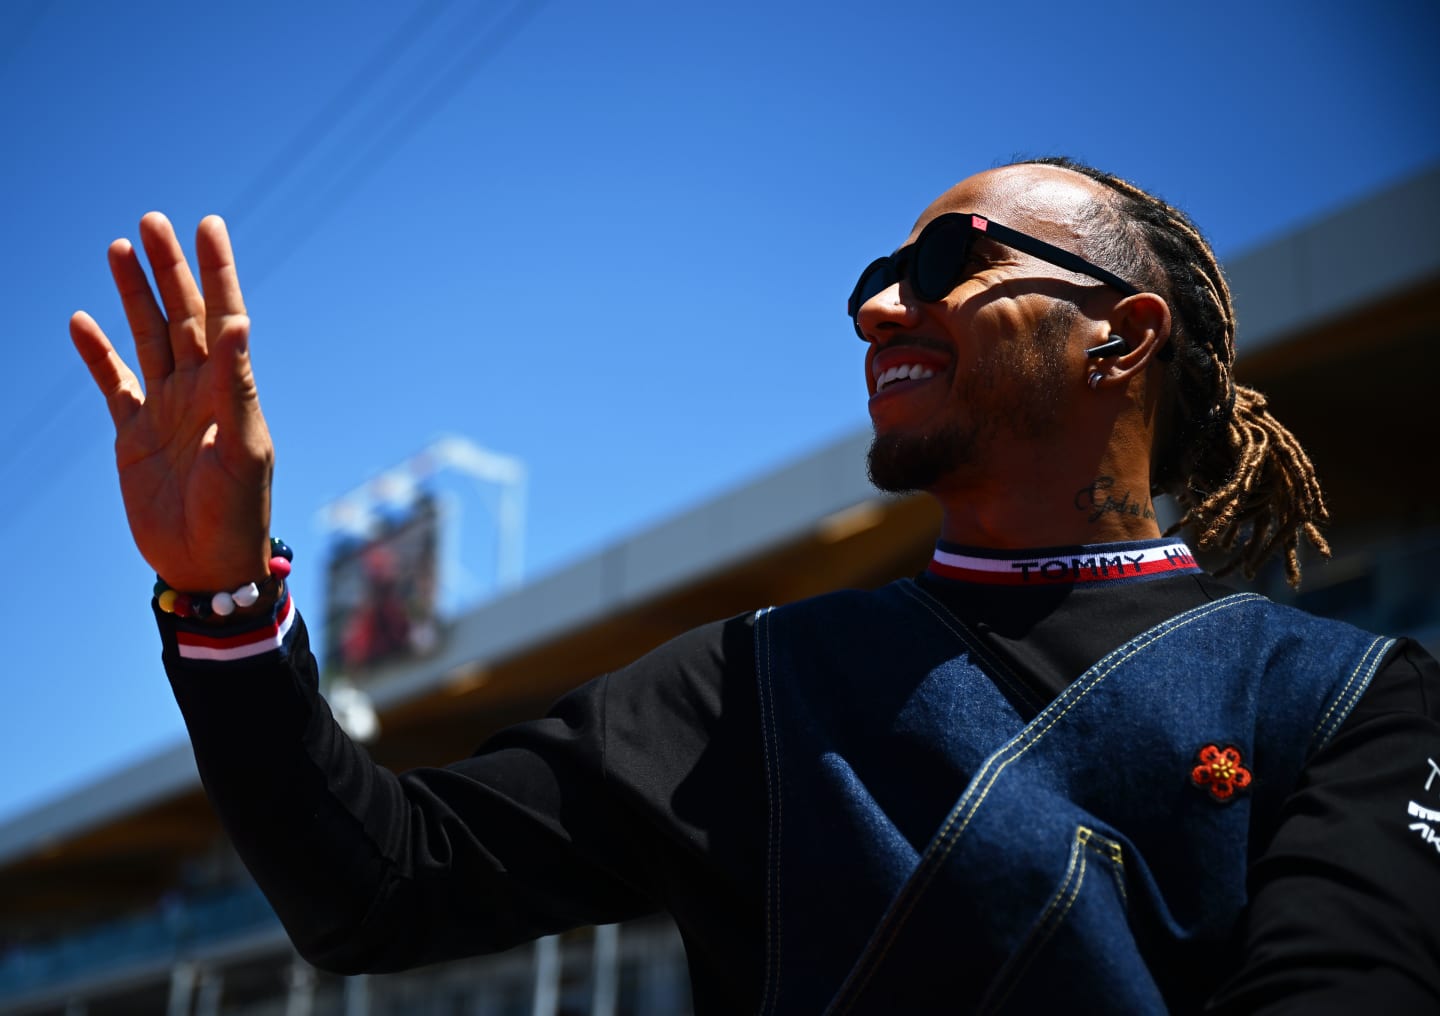 MONTREAL, QUEBEC - JUNE 19: Lewis Hamilton of Great Britain and Mercedes waves to the crowd from